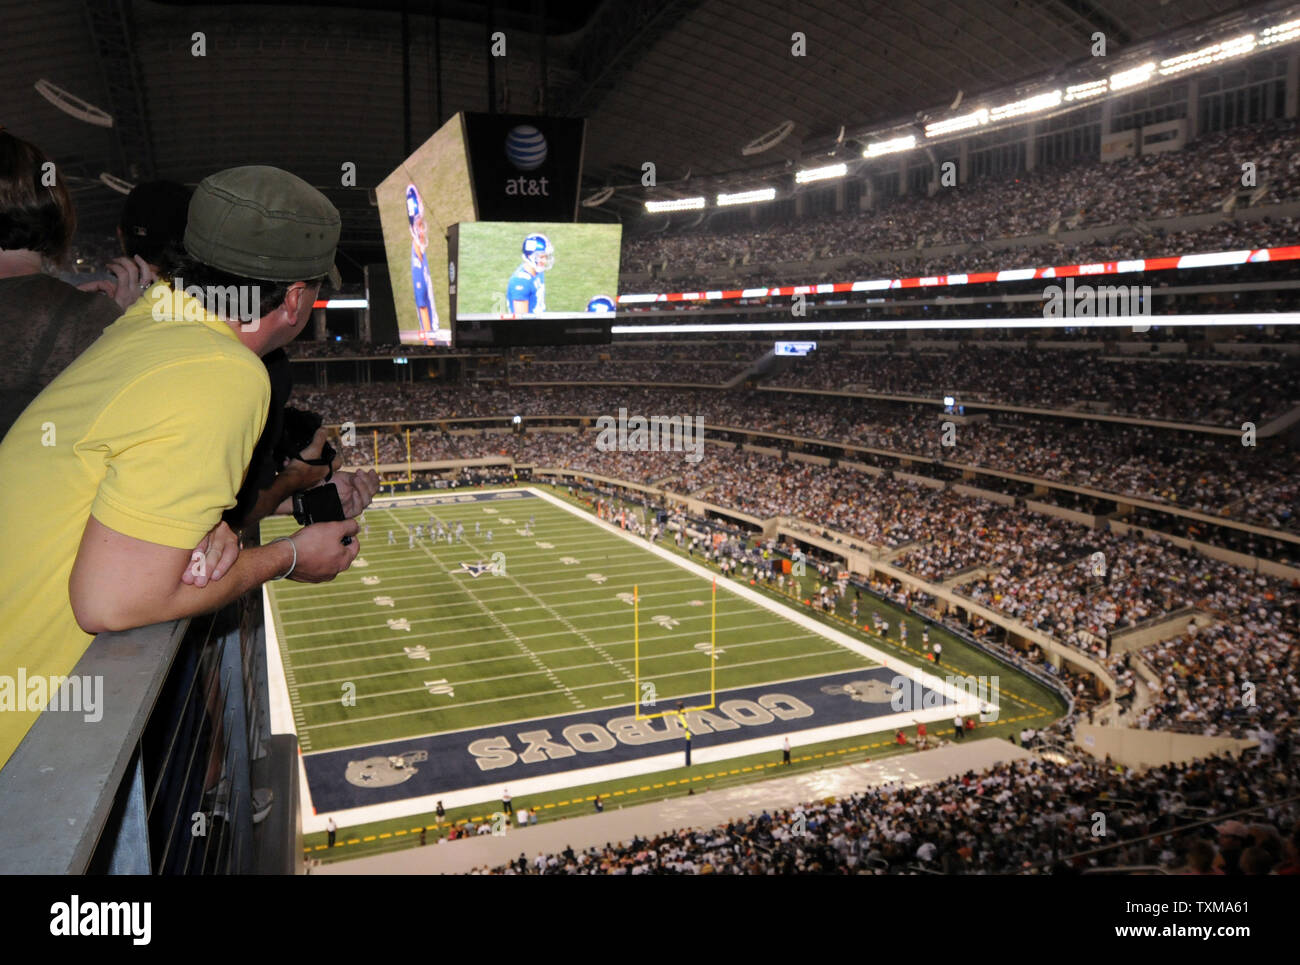 A fan watches the Dallas Cowboys battle the New York Giants on the stadium's giant video scoreboard September 21, 2009 in Arlington, Texas.   More than 100,000 fans filled the new $1.2 billion stadium for the first NFL game.   UPI/Ian Halperin Stock Photo